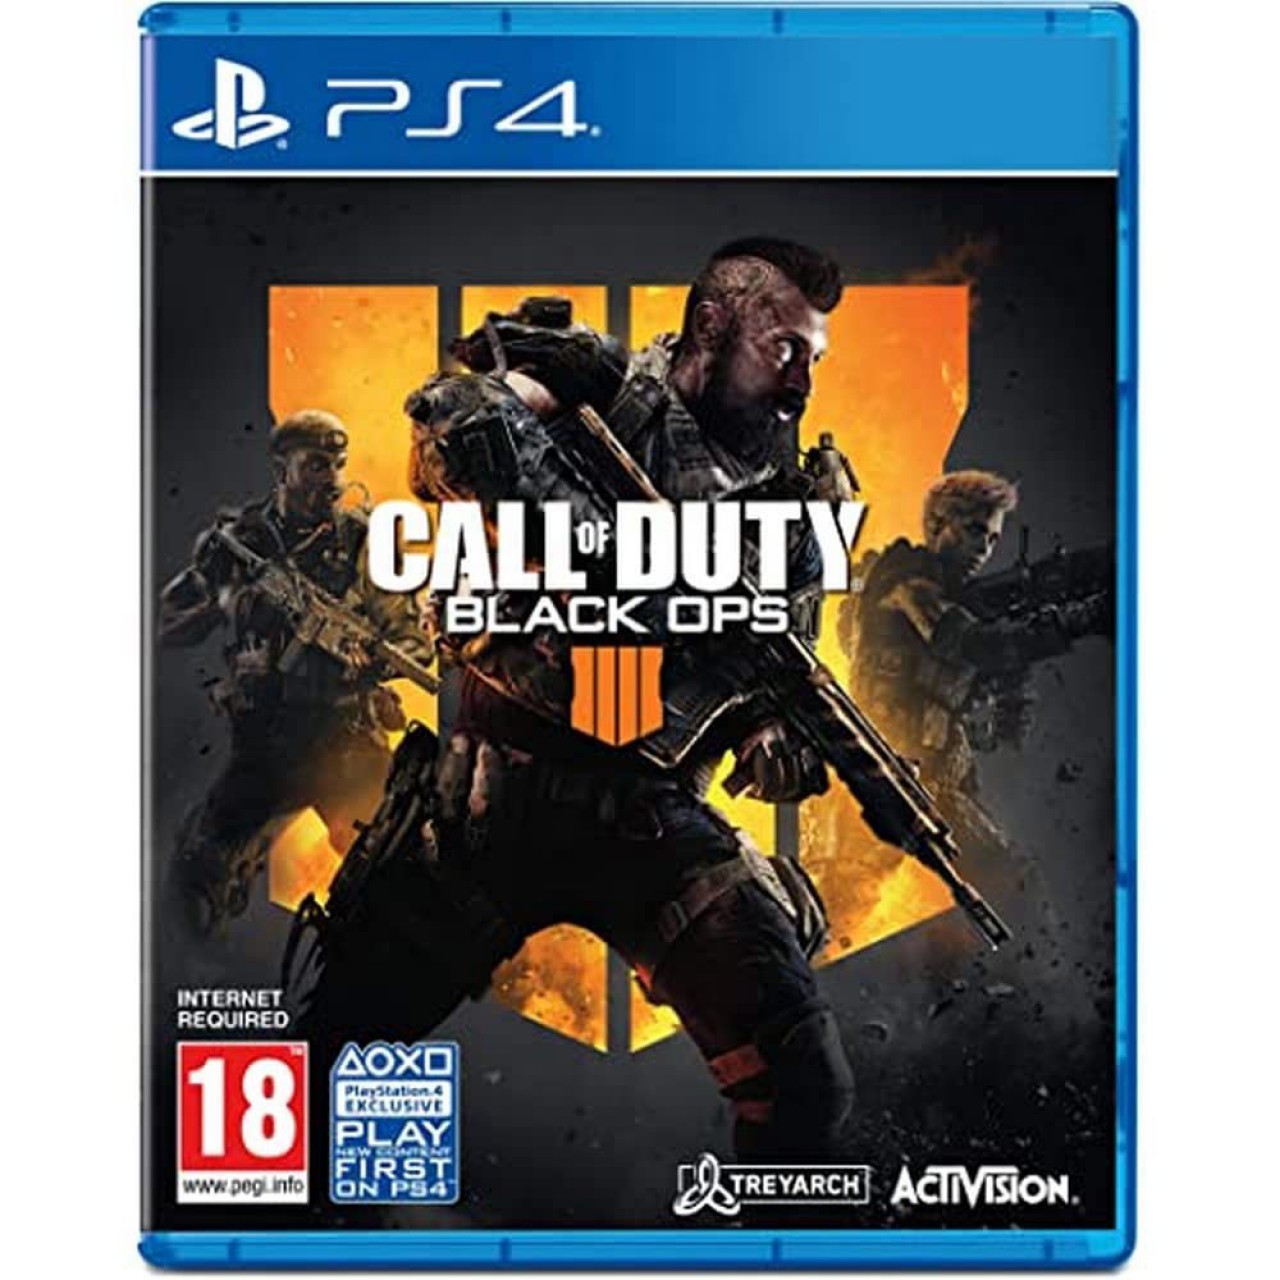 Call of duty black ops 4, Video Games - Consolas, Bissau